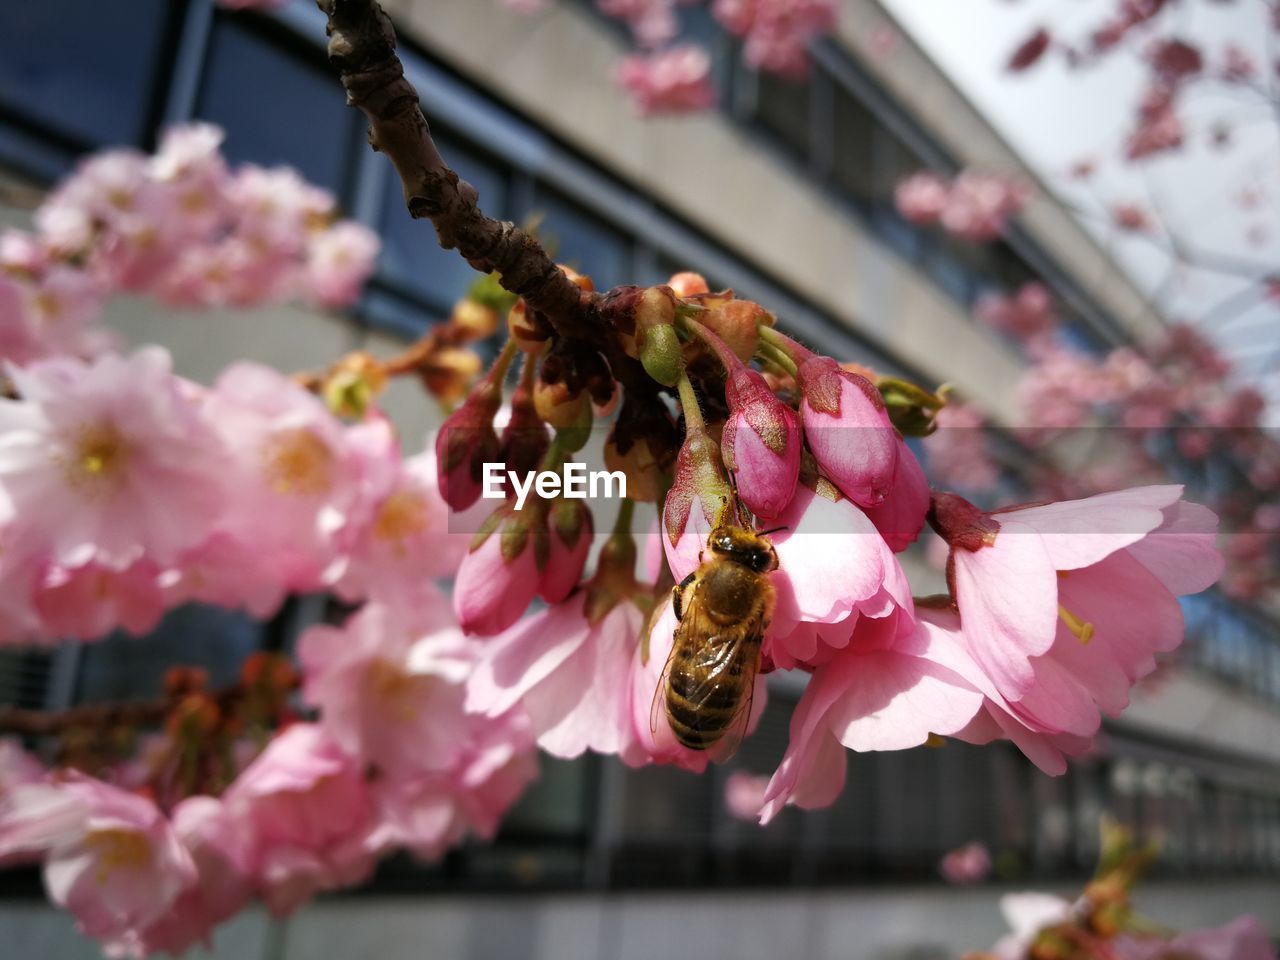 CLOSE-UP OF PINK INSECT ON CHERRY BLOSSOM